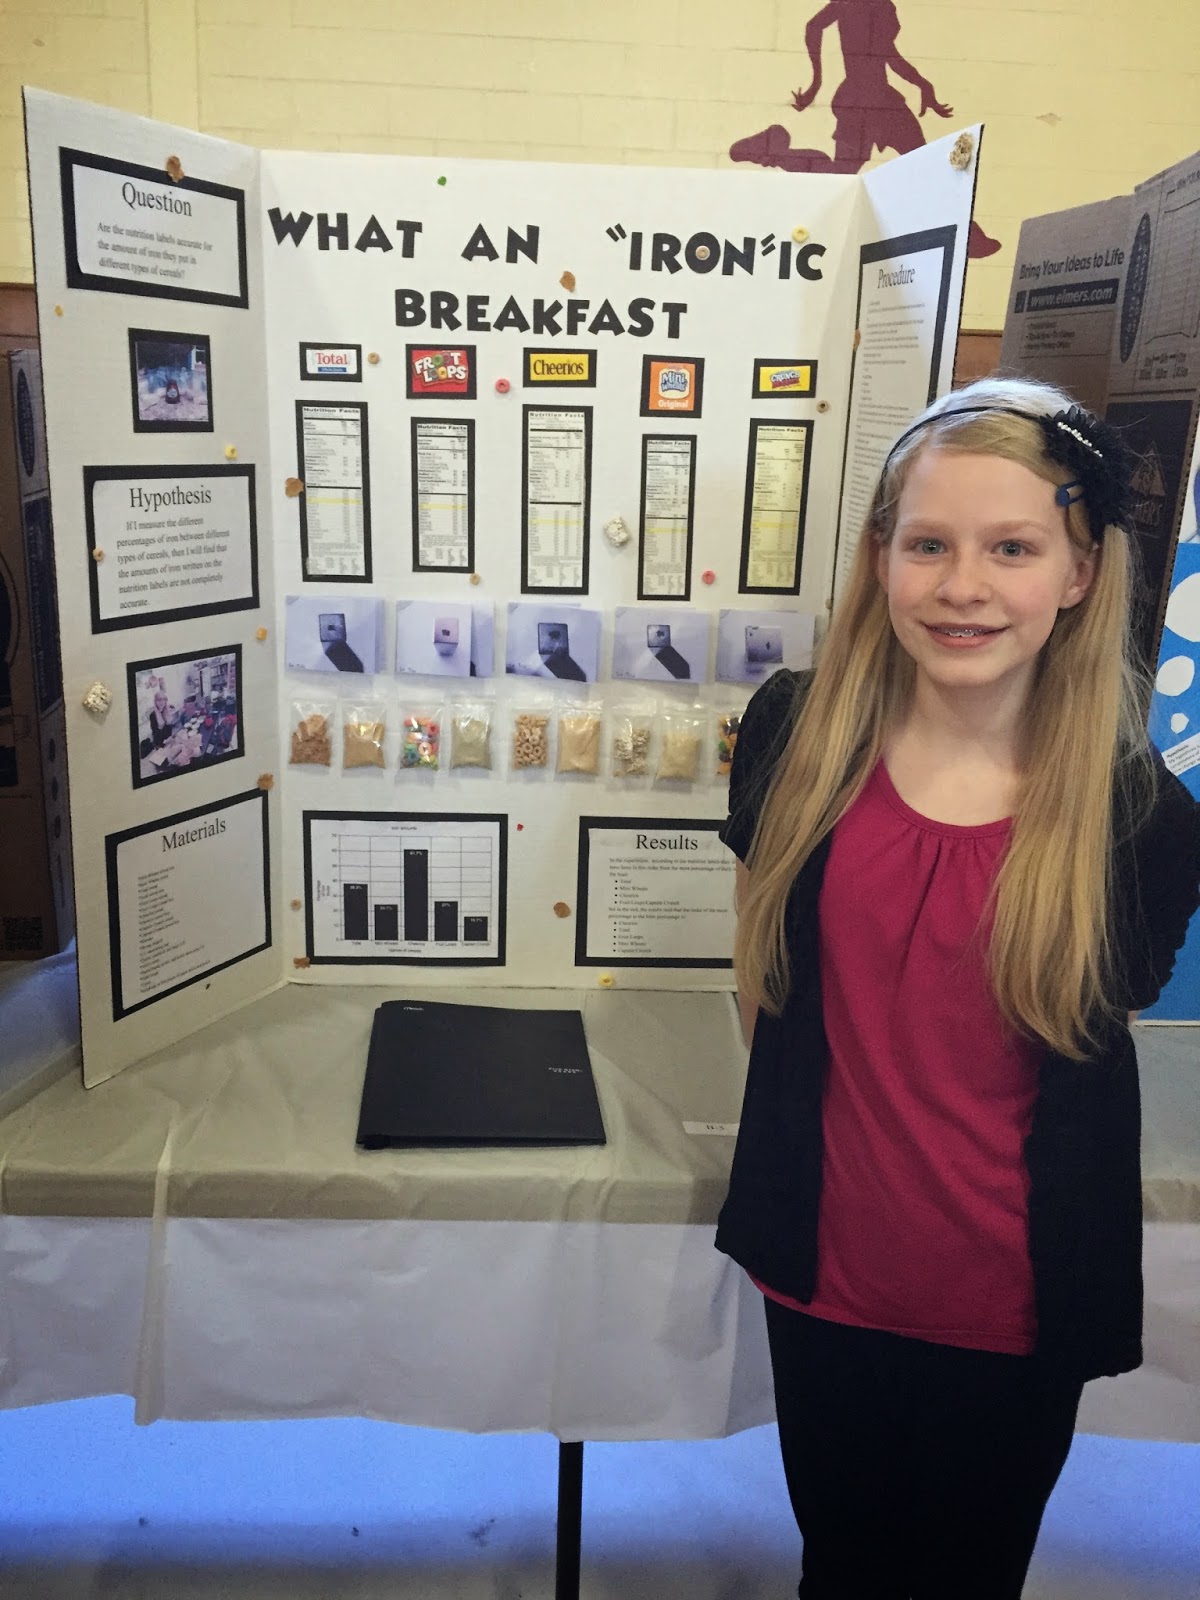 Welcome to the Krazy Kingdom: 6th Grade Science Fair